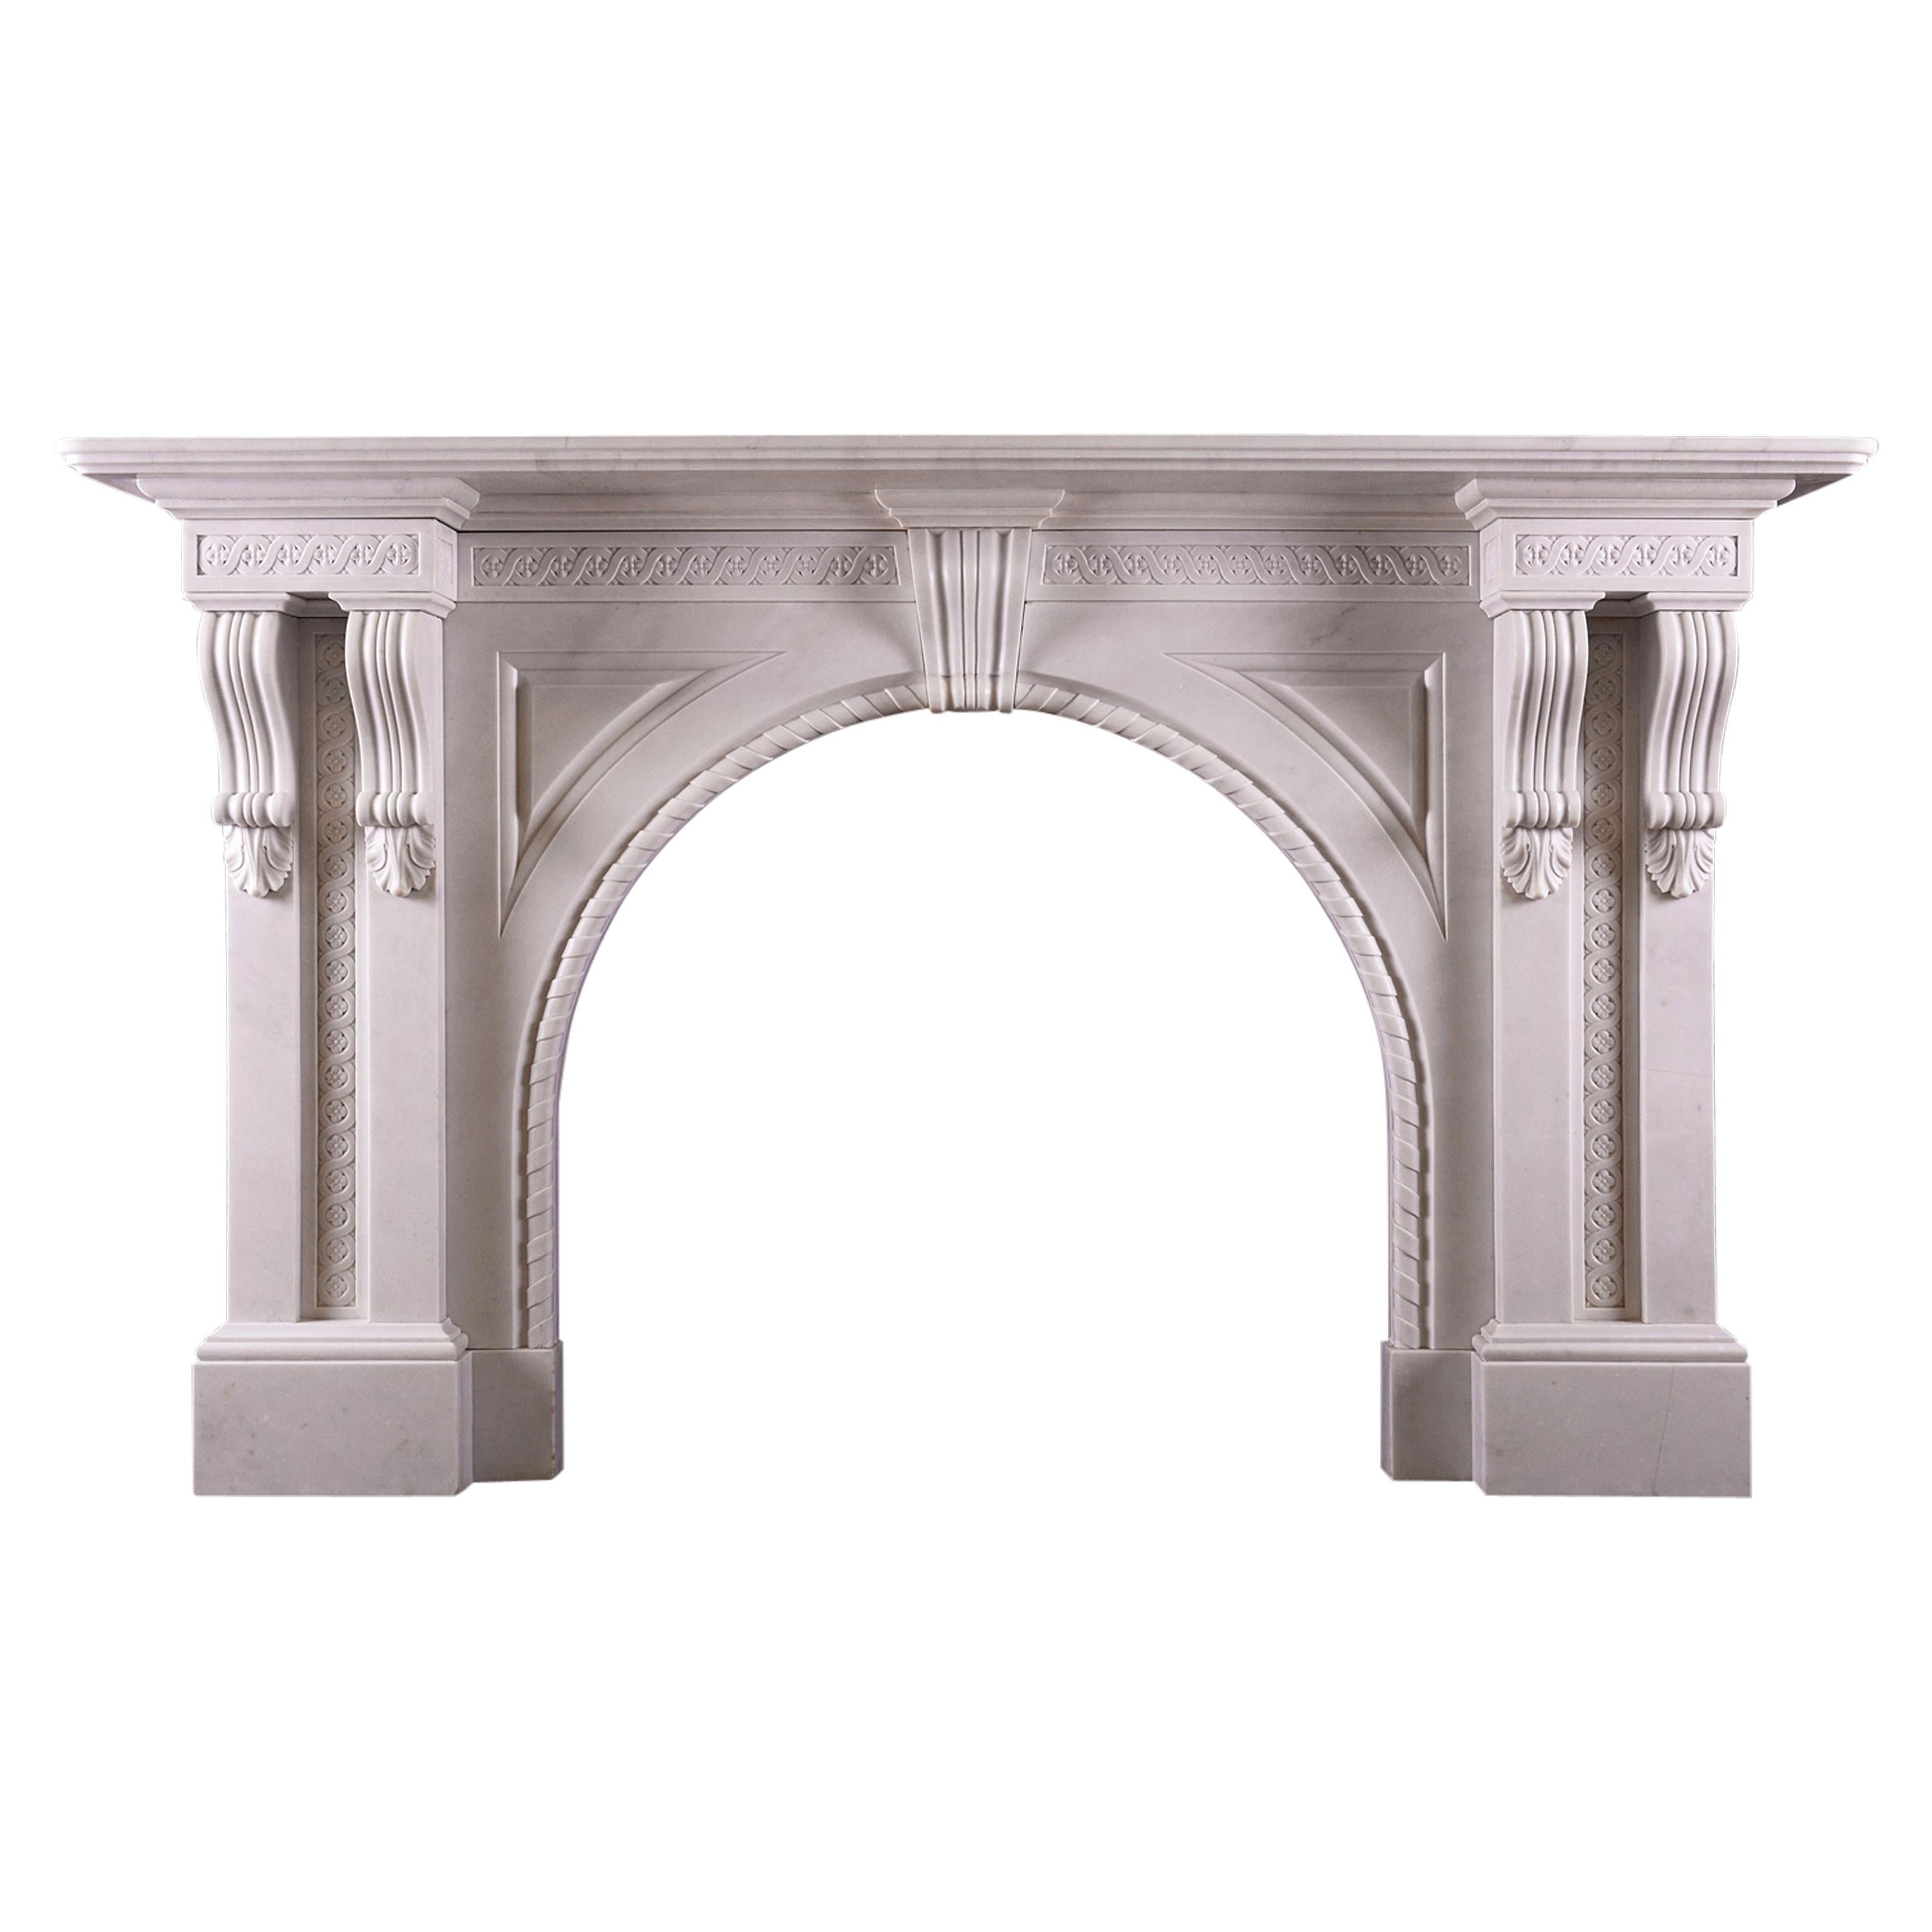 Quality Period Victorian Fireplace in Italian Statuary Marble For Sale